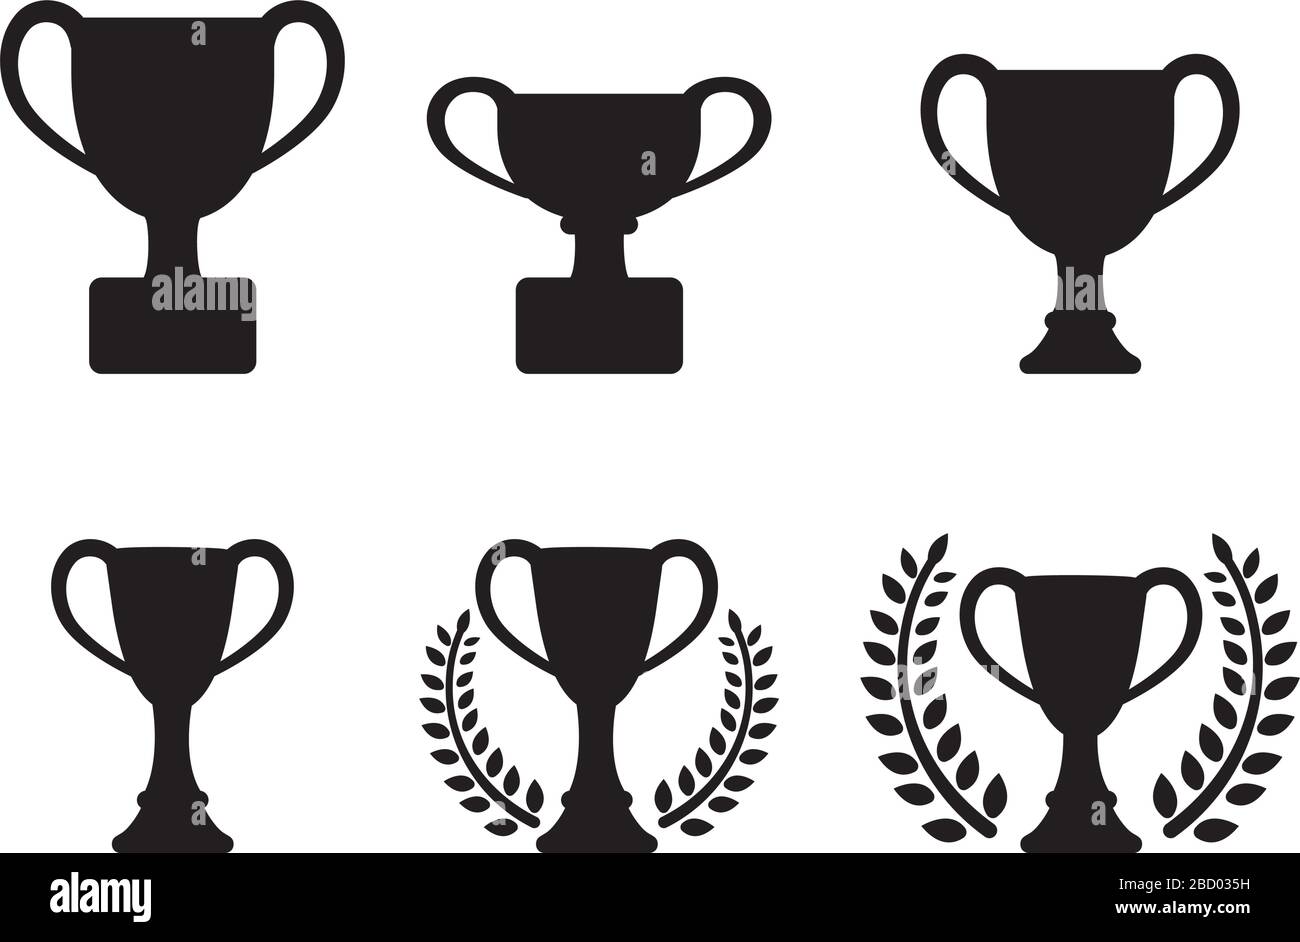 Trophy cup silhouette icon set. Stock Vector